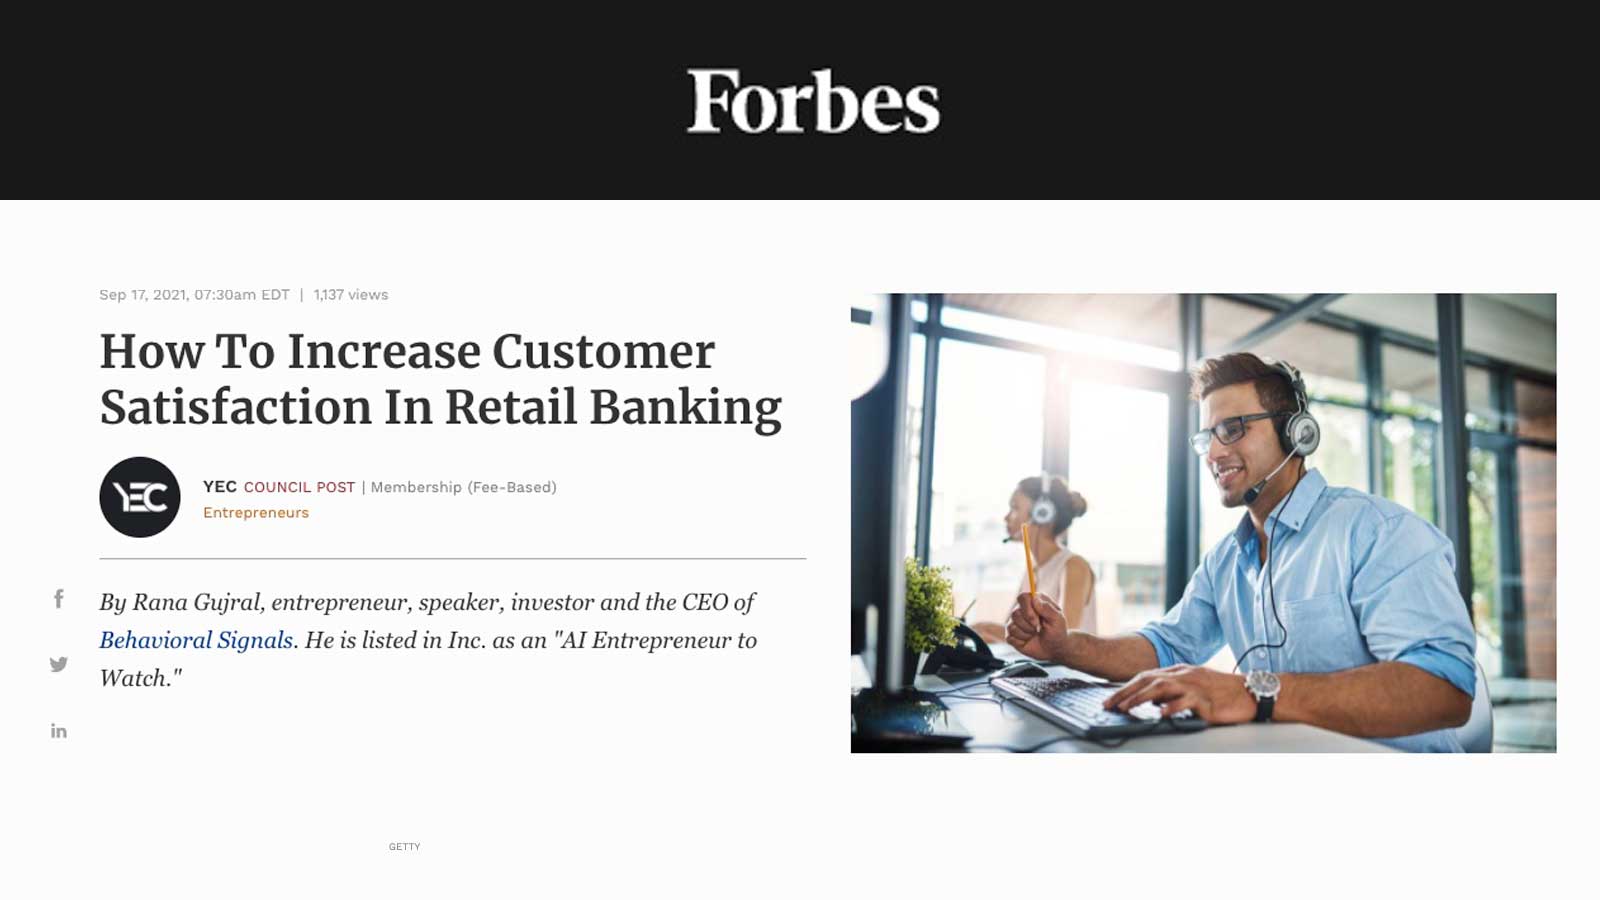 Forbes-How To Increase Customer Satisfaction In Retail Banking